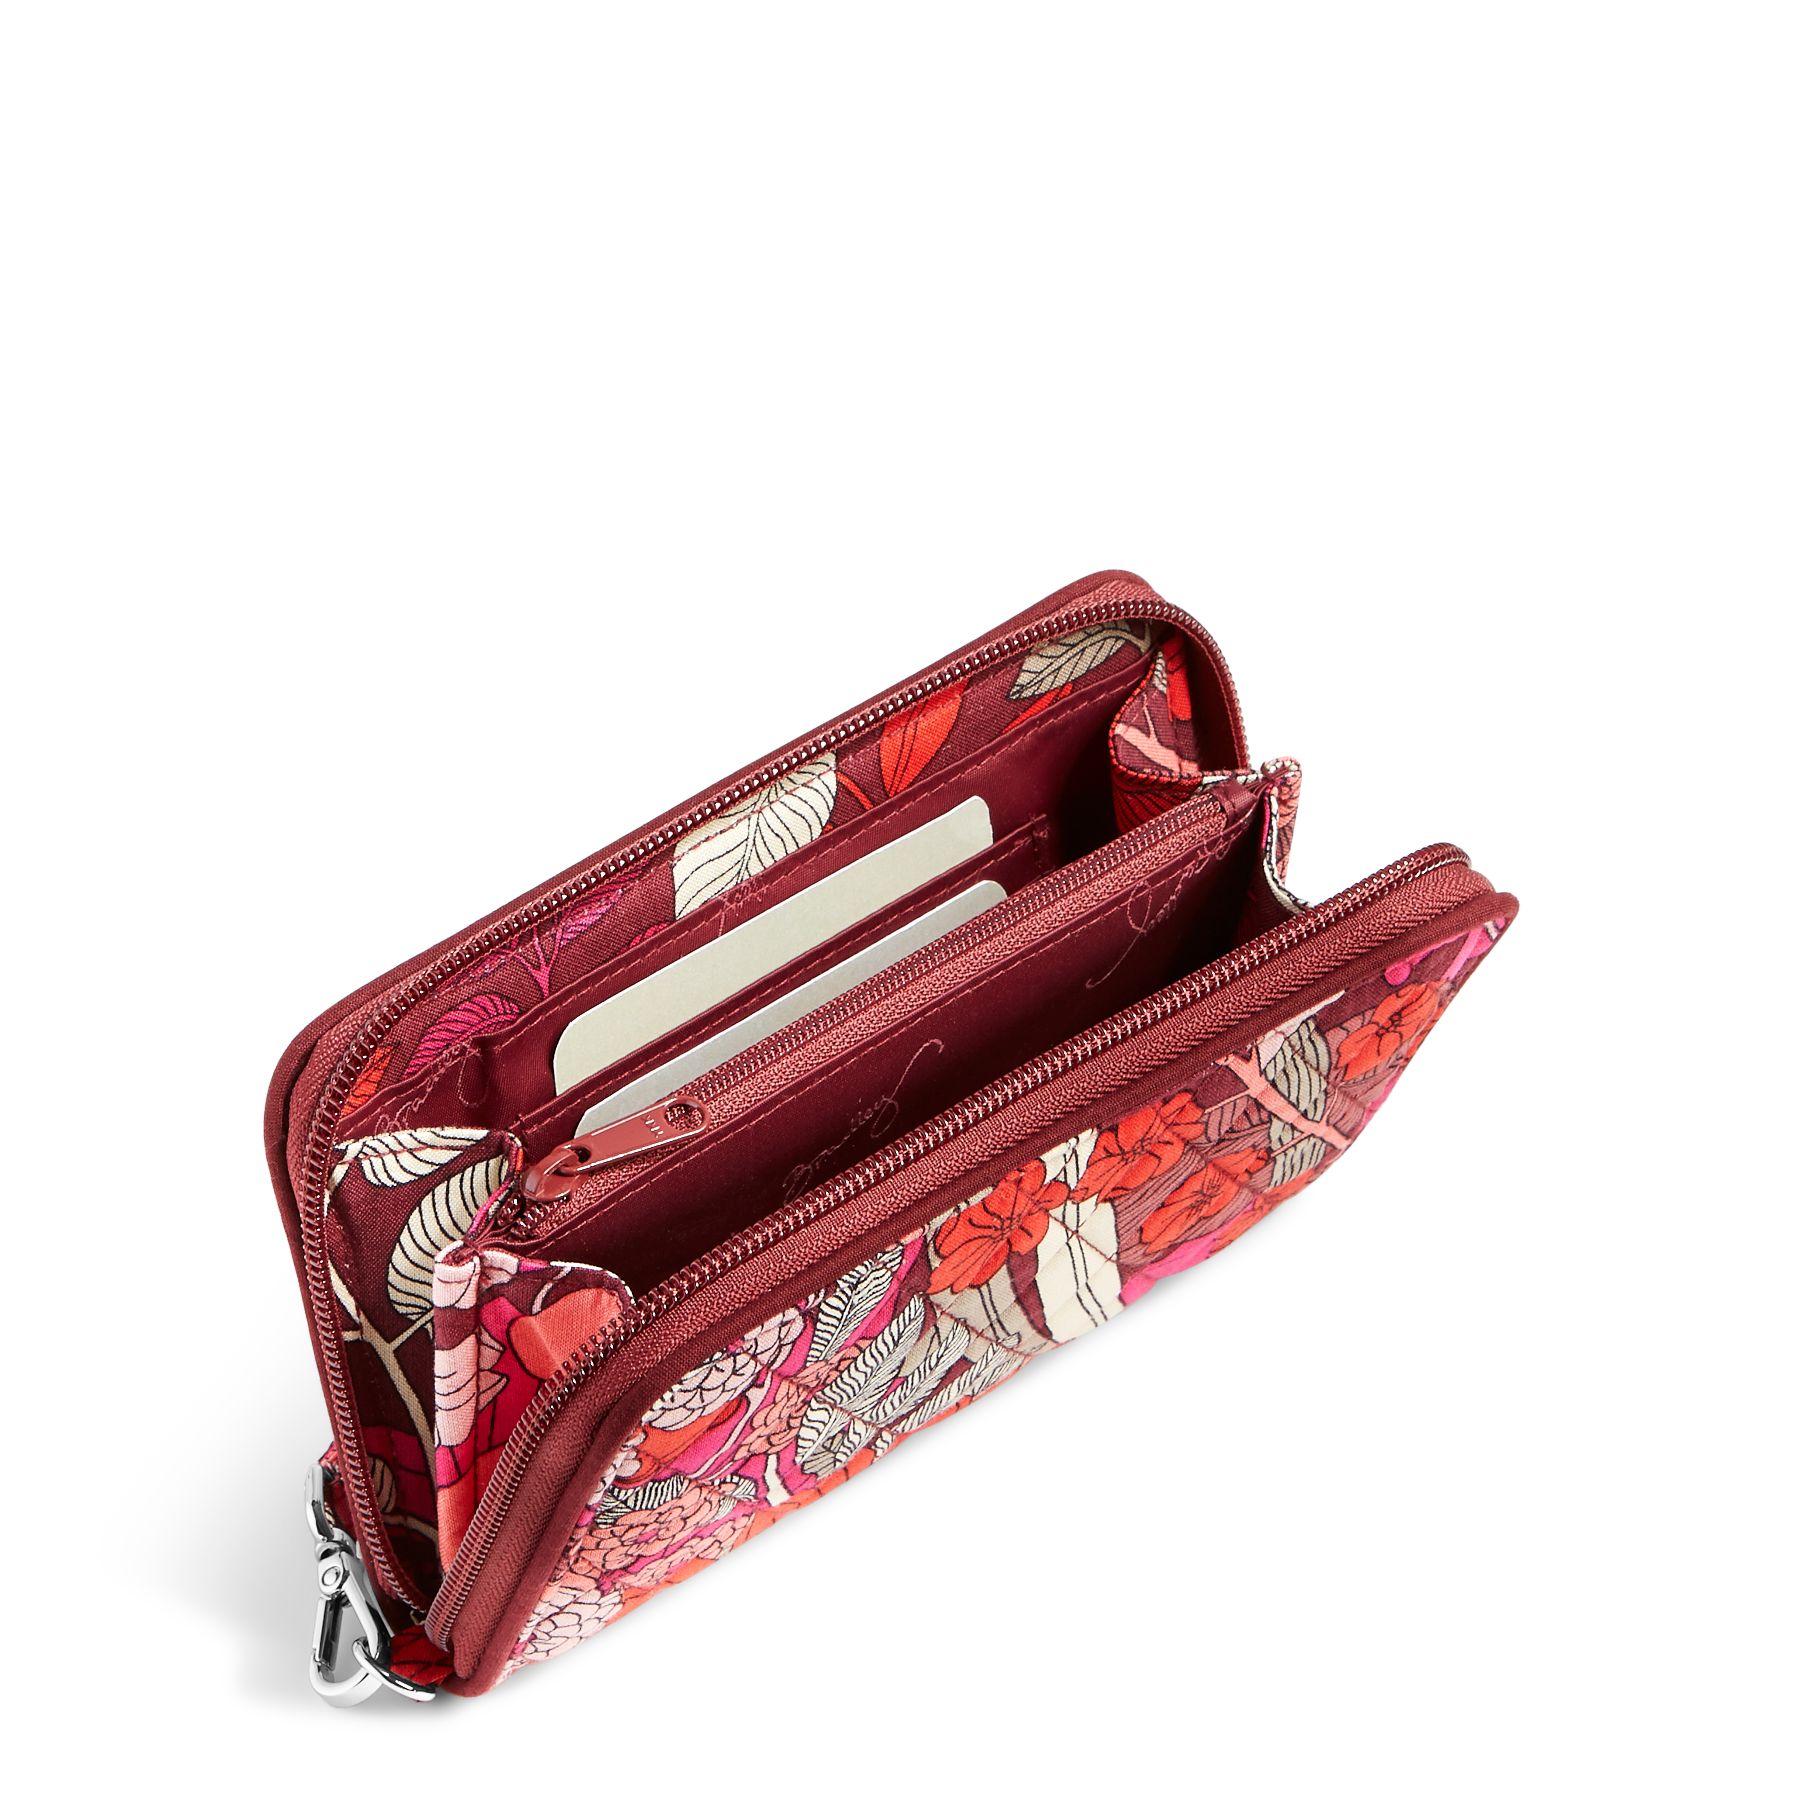 Vera Bradley 30% Off Coupon With Women’s Wallets